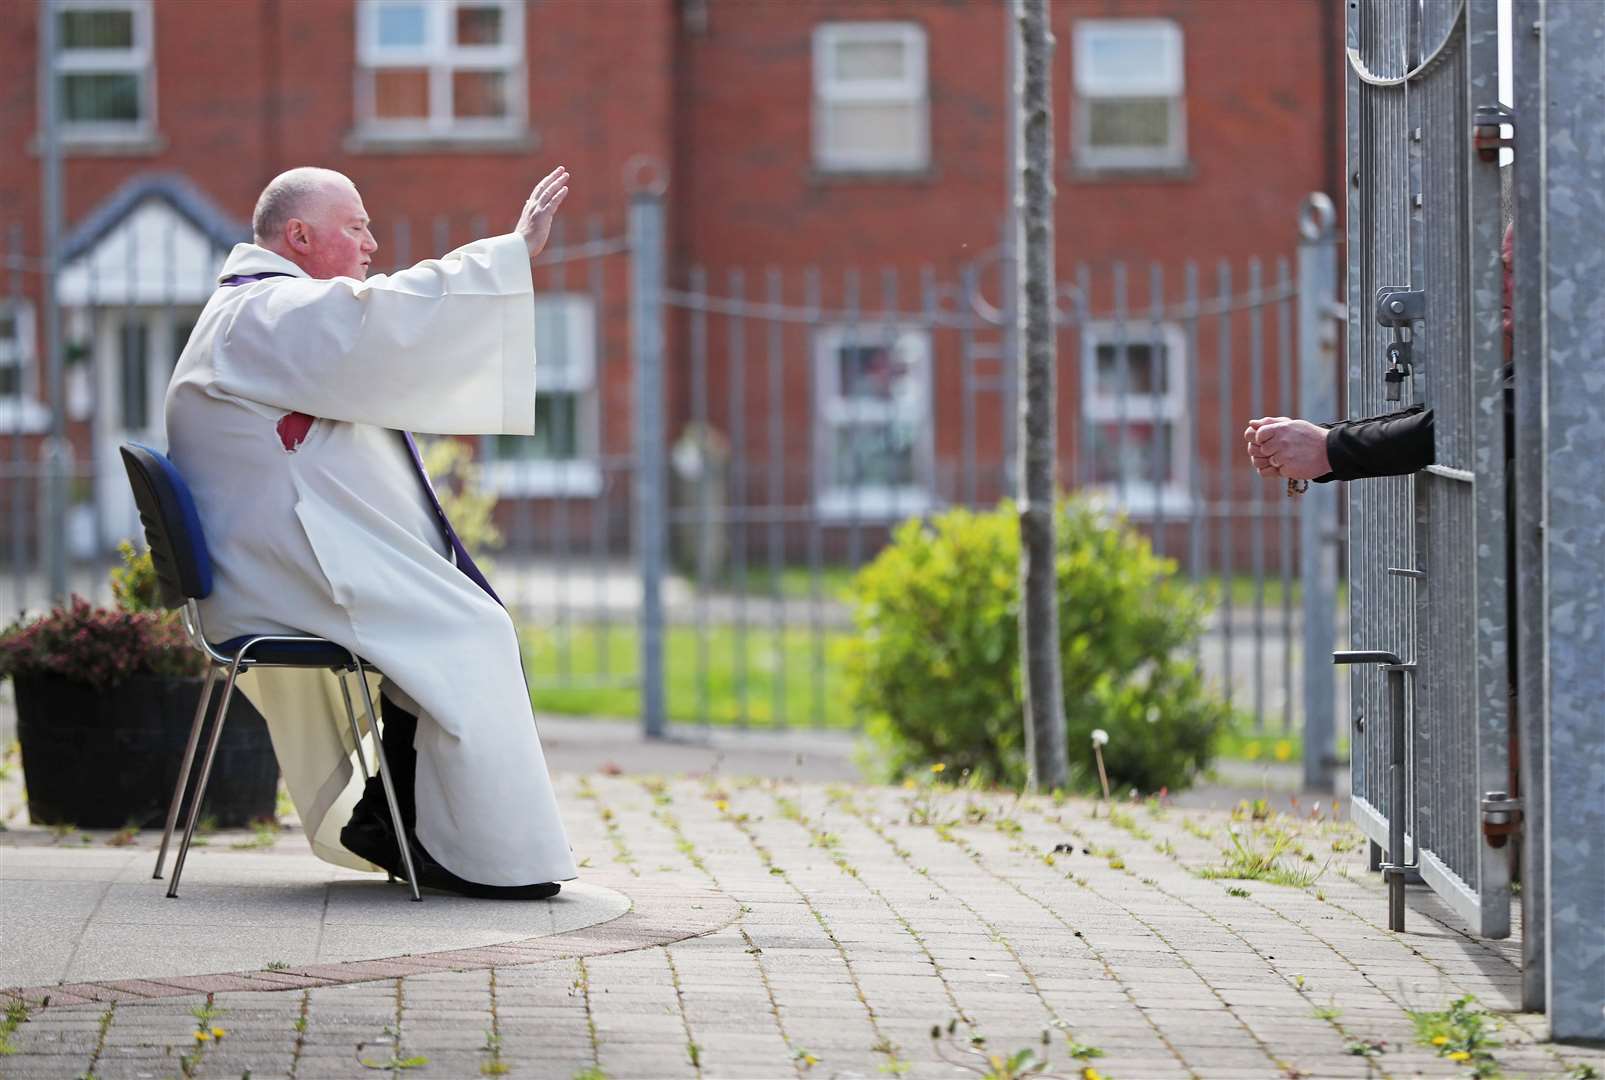 Fr Paddy McCafferty resumed hearing confessions in May while observing social distancing through the locked gates of Corpus Christi Church in Ballymurphy, West Belfast (Niall Carson/PA)